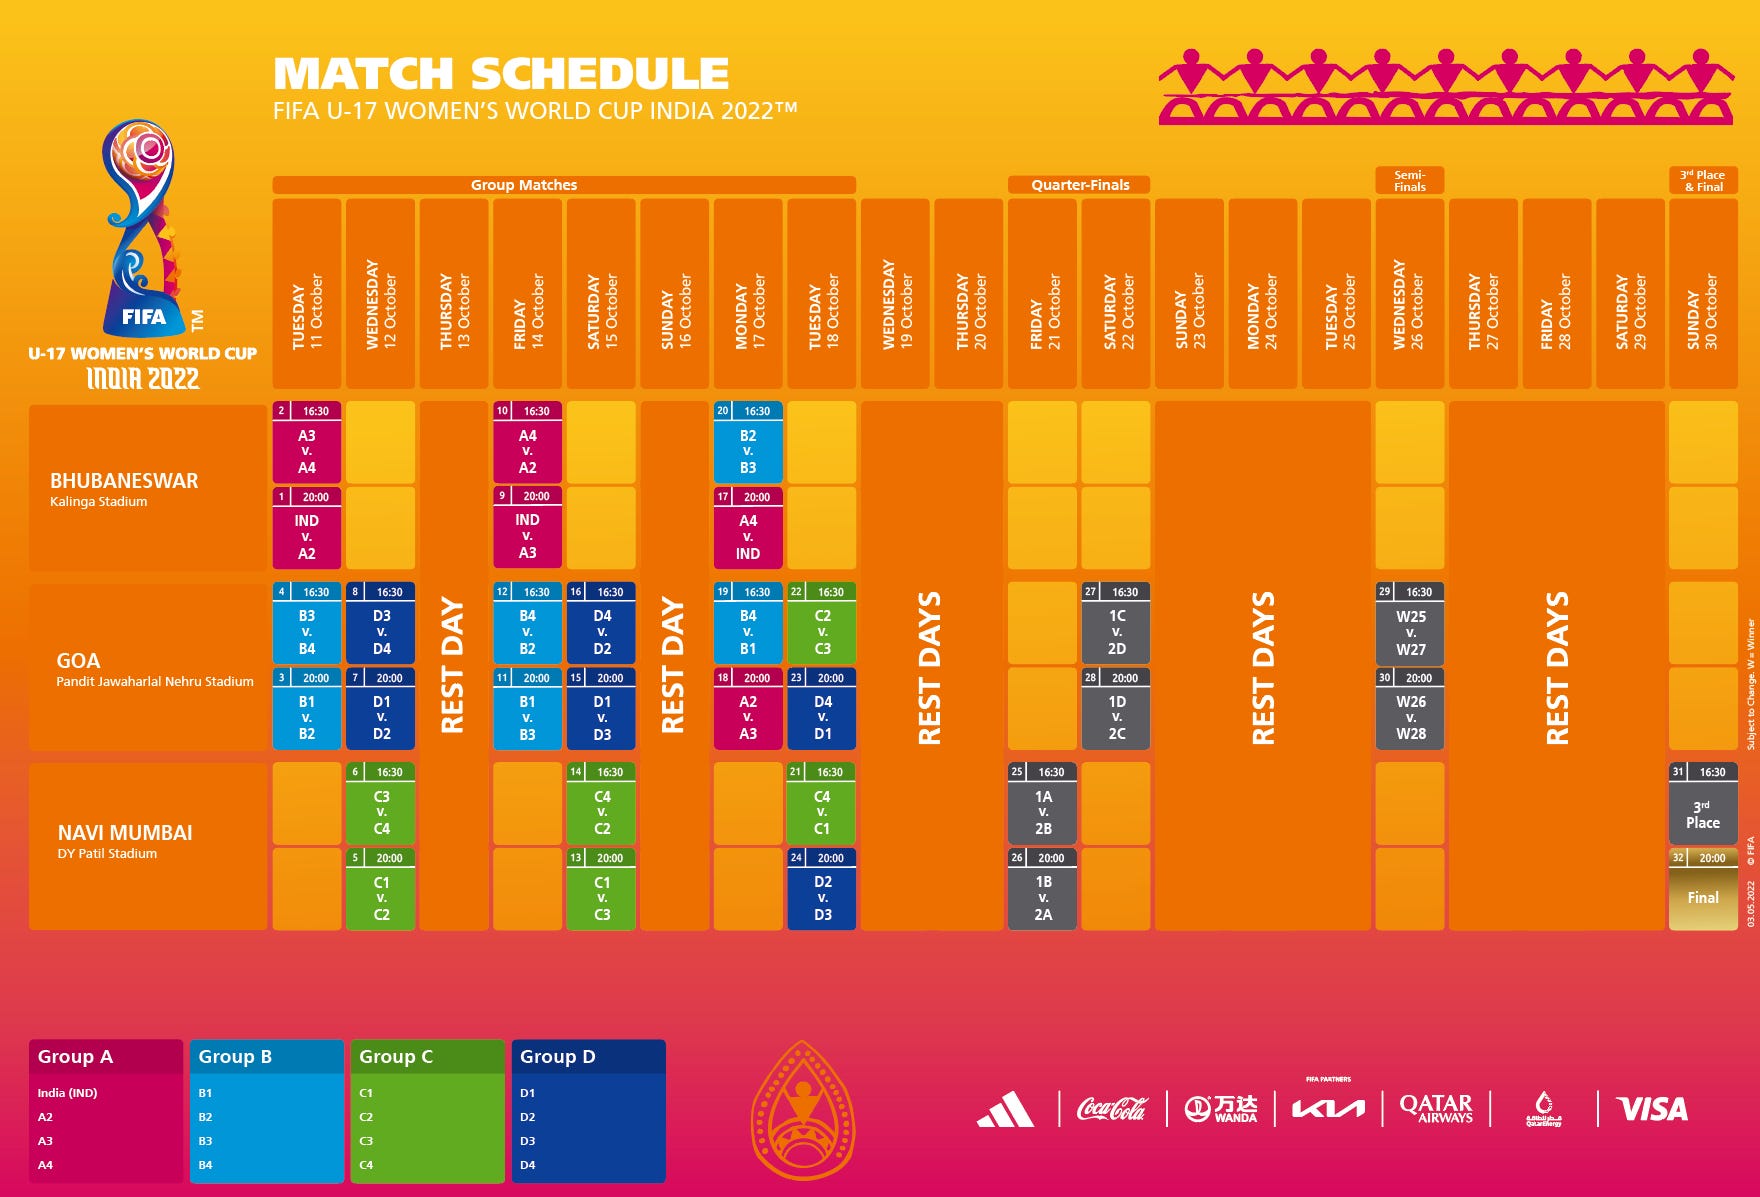 EMBED ONLY U-17 Womens World Cup India 2022 Match Schedule